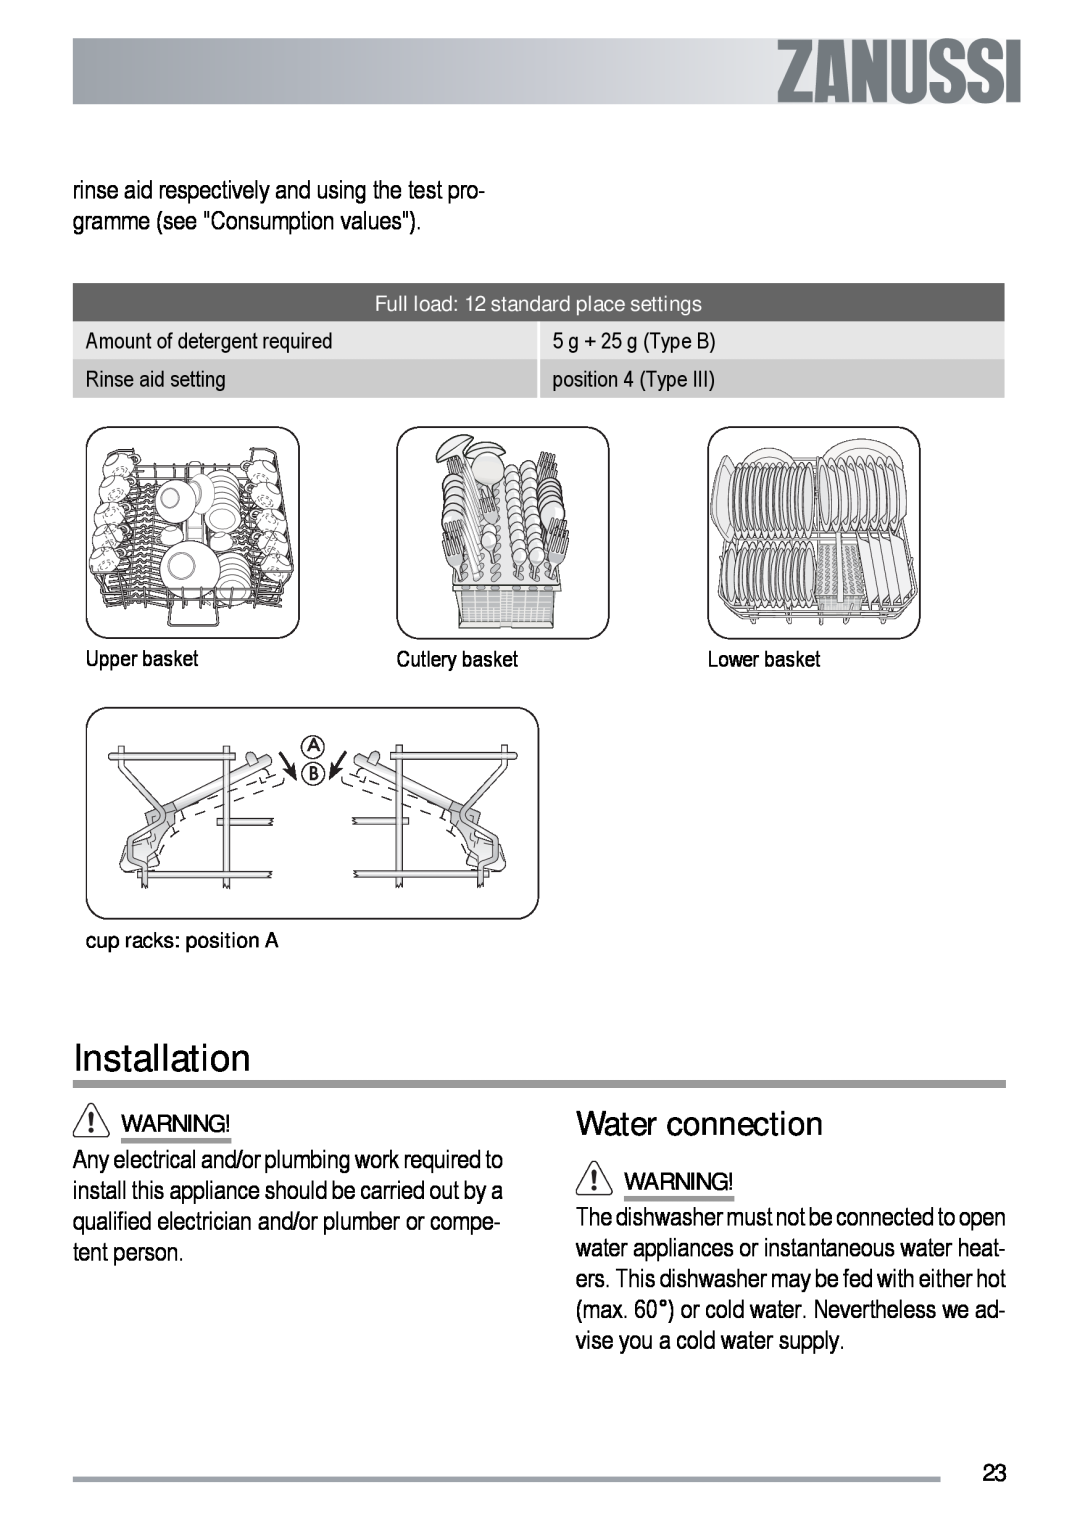 Zanussi ZDT 6454 user manual Installation, Water connection, Full load 12 standard place settings, cup racks position A 